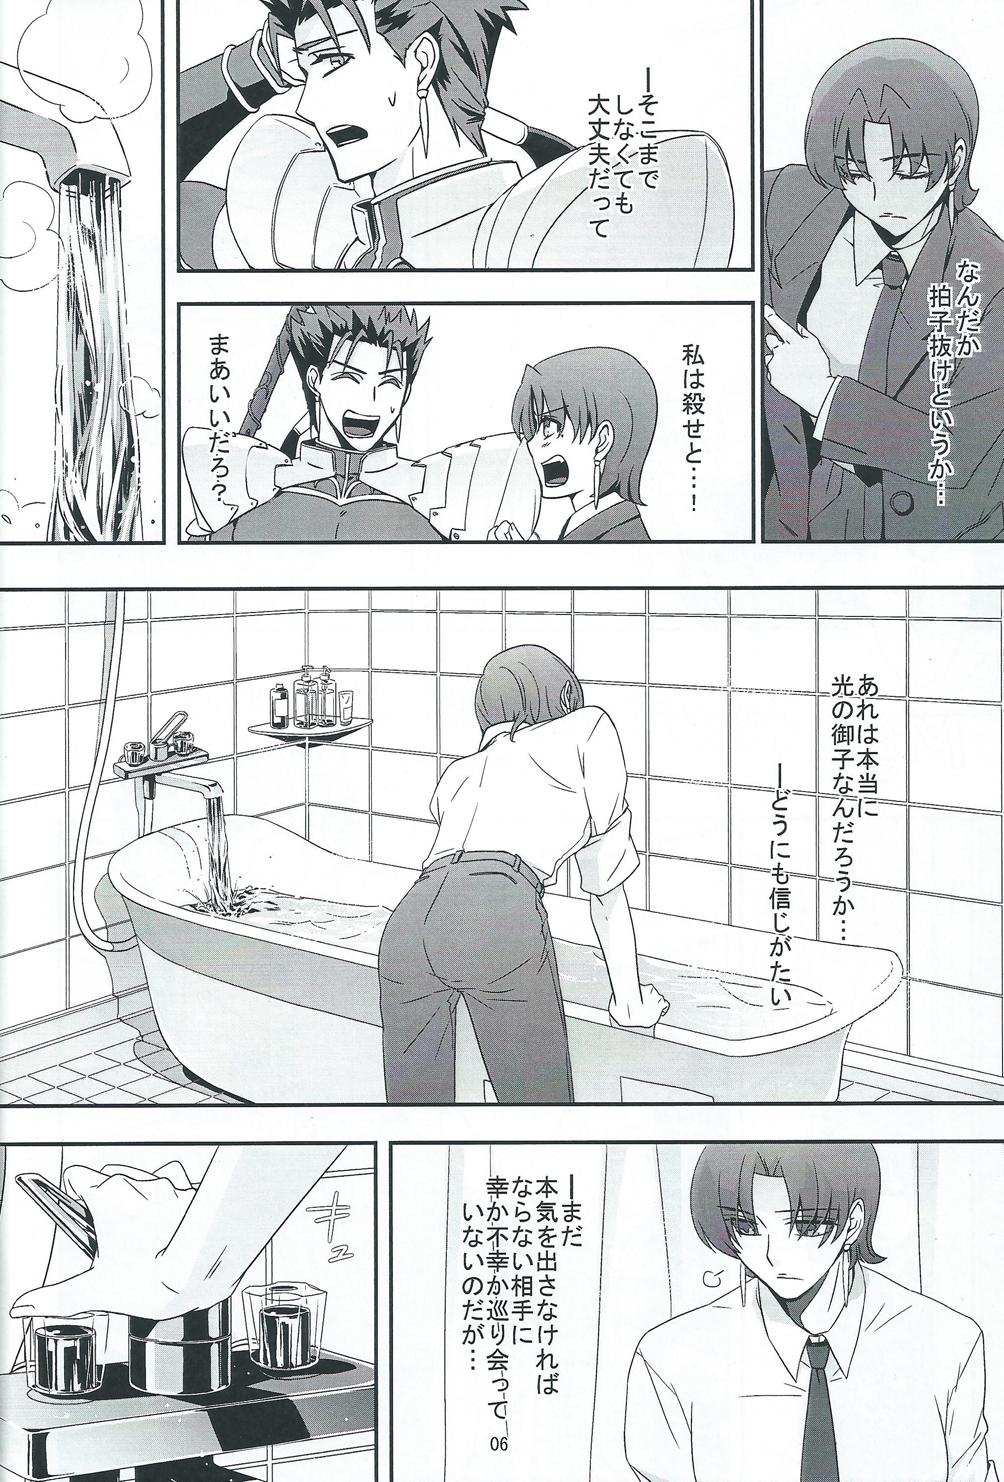 Reverse Cowgirl My Heart Goes Bang - Fate hollow ataraxia Rubdown - Page 5